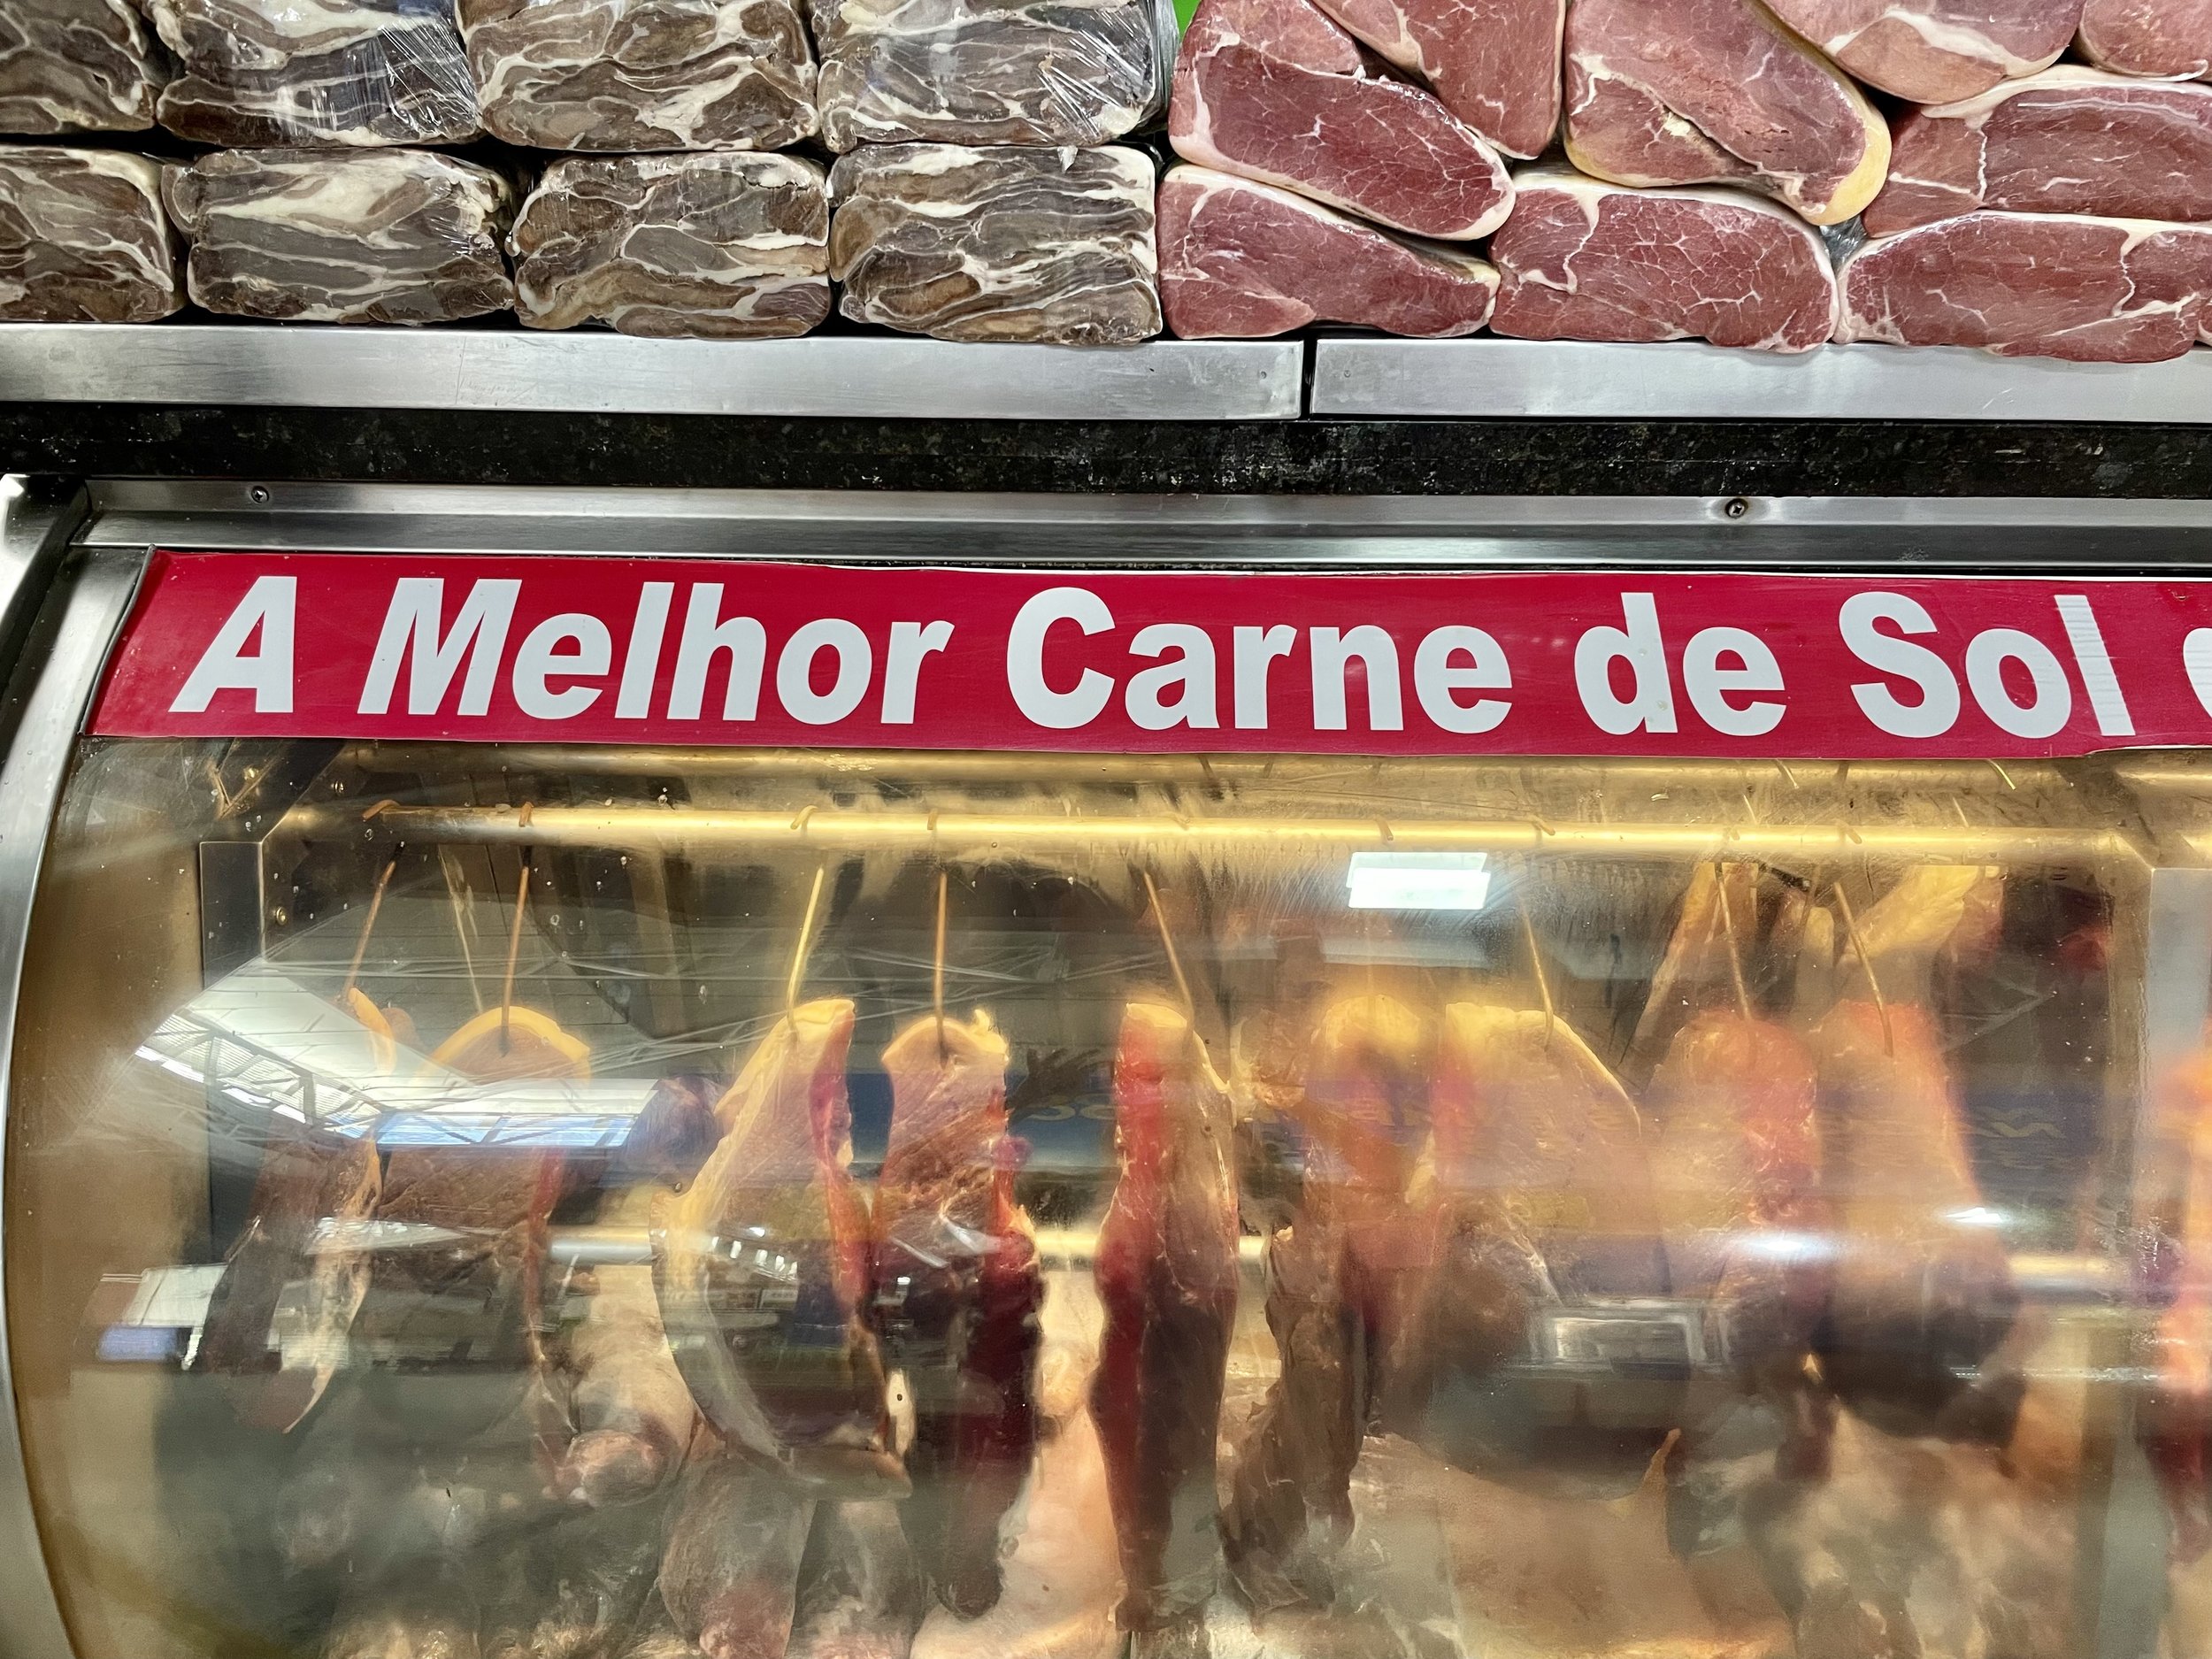 Carne do Sol: A partially dried beef, beloved by Brazilian carnivores.